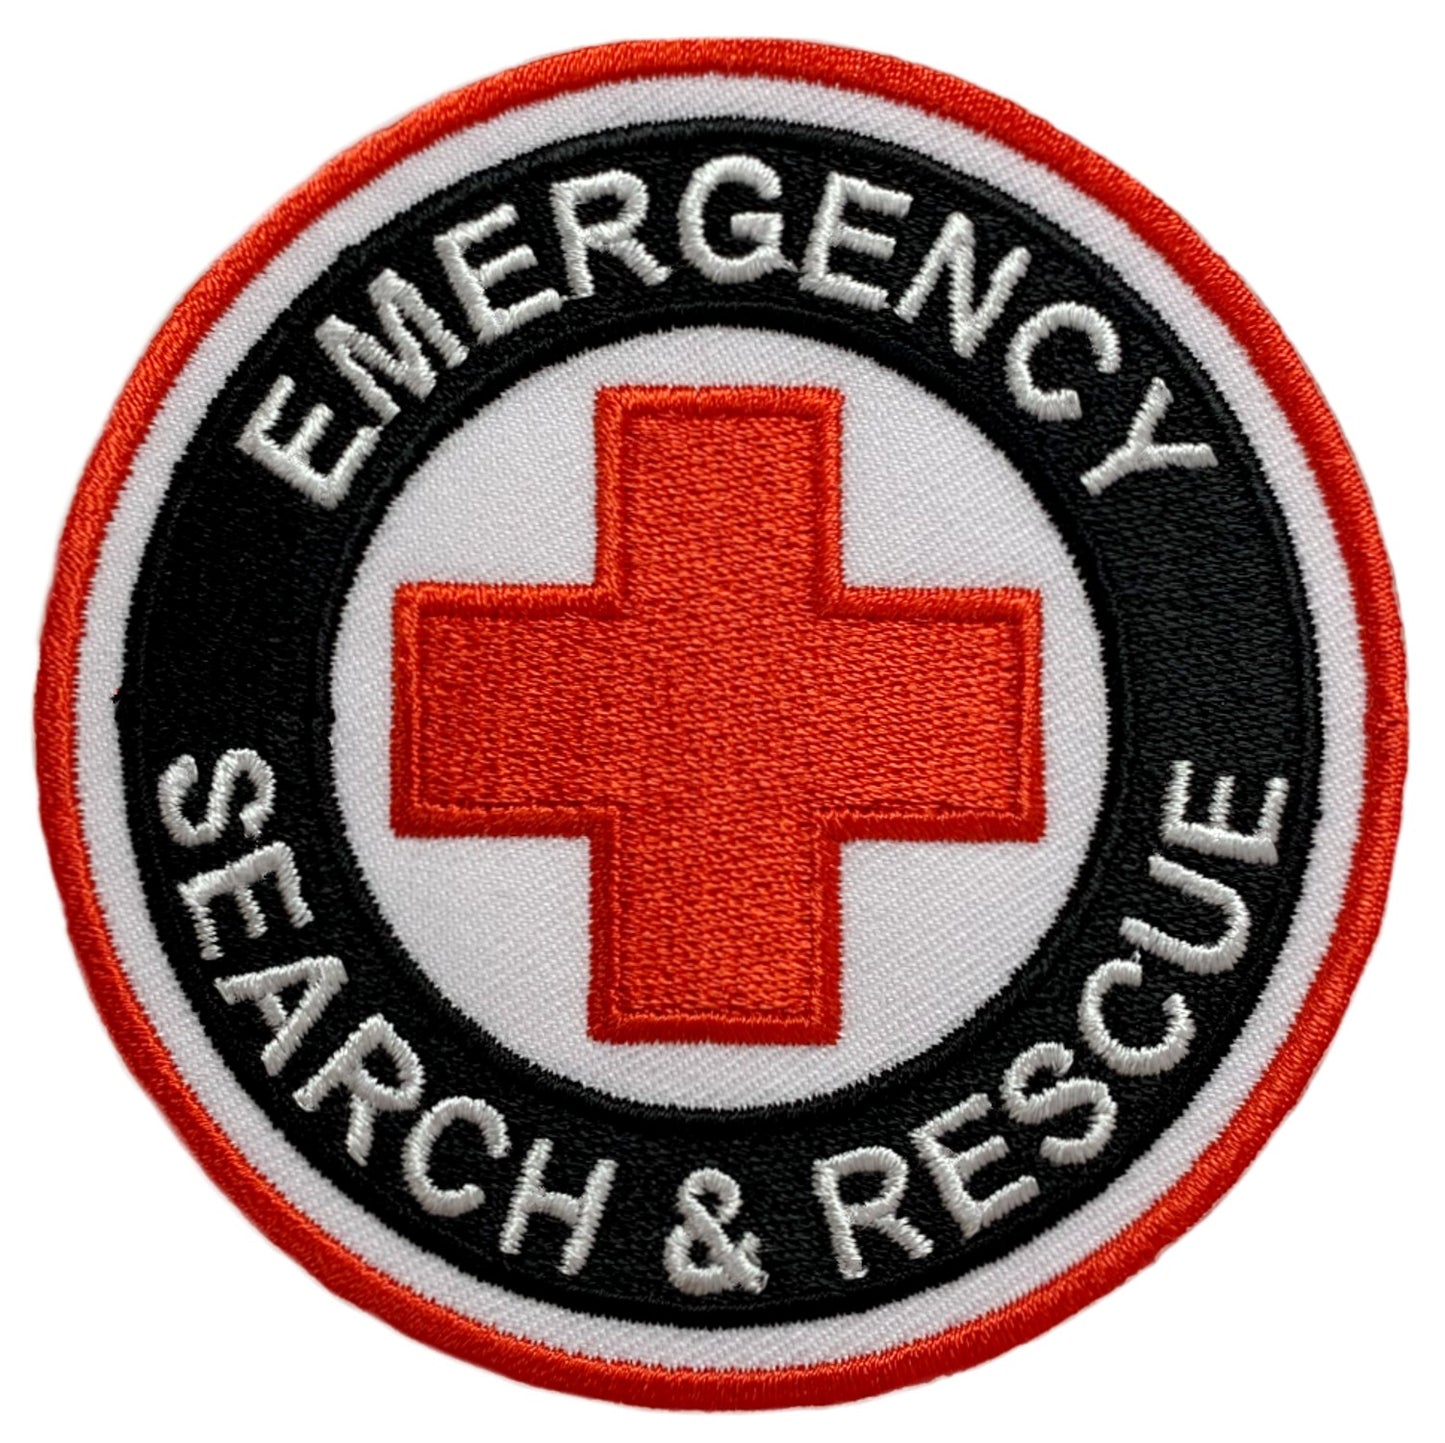 Emergency Search & Rescue SAR Patch (3 Inch) Embroidered Iron or Sew-on Badge Applique Costume Shirt / Bag / Jacket / Hat / Gift Patches